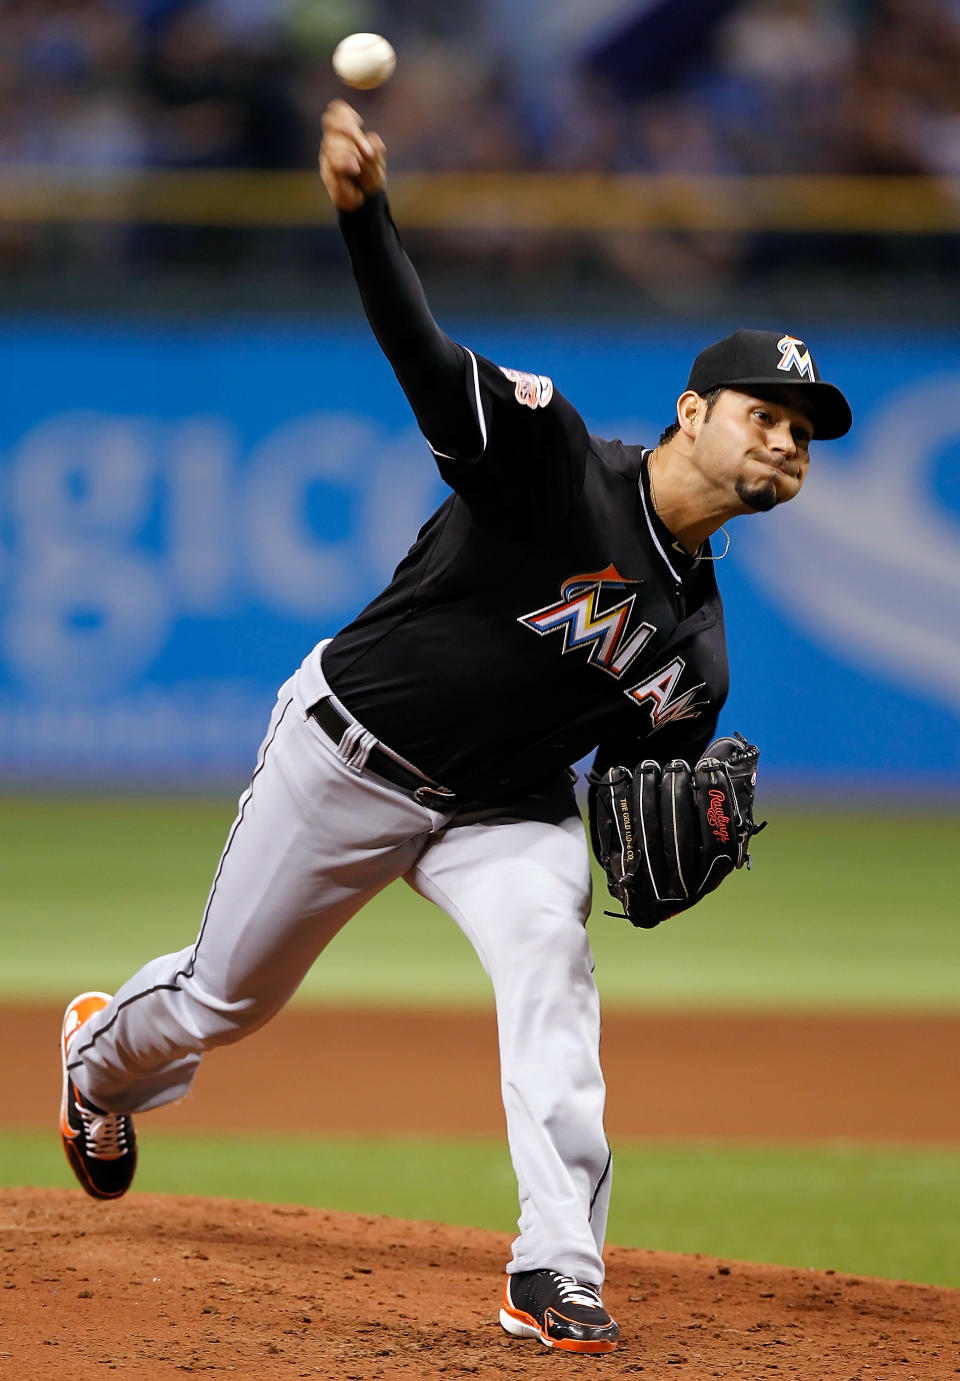 ST PETERSBURG, FL - JUNE 16: : Pitcher Anibal Sanchez #19 of the Miami Marlins pitches against the Tampa Bay Rays during the game at Tropicana Field on June 16, 2012 in St. Petersburg, Florida. (Photo by J. Meric/Getty Images)